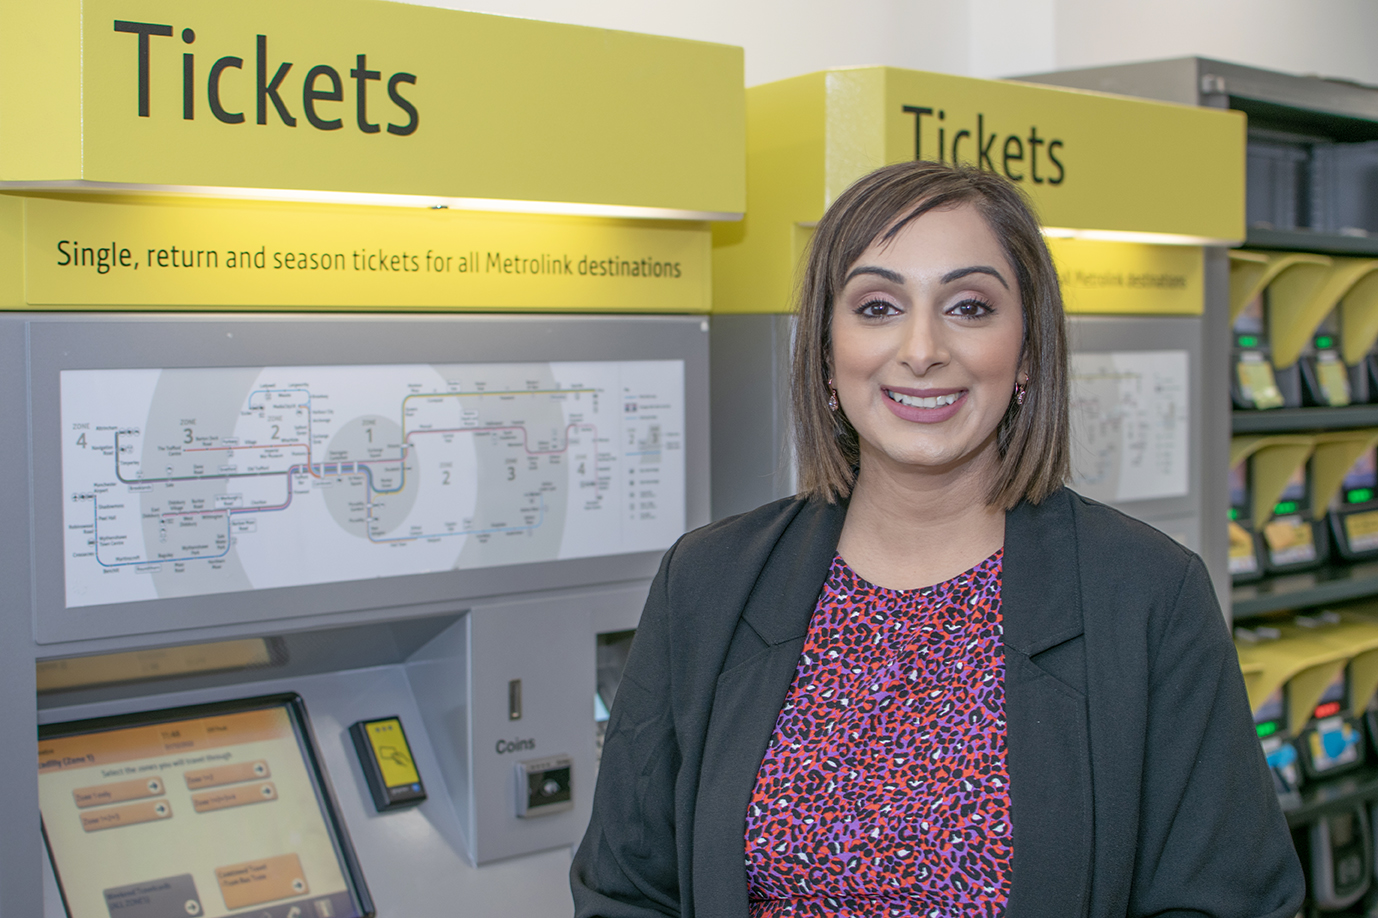 Picture of tfgm staff stood in front of a metrolink ticket machine